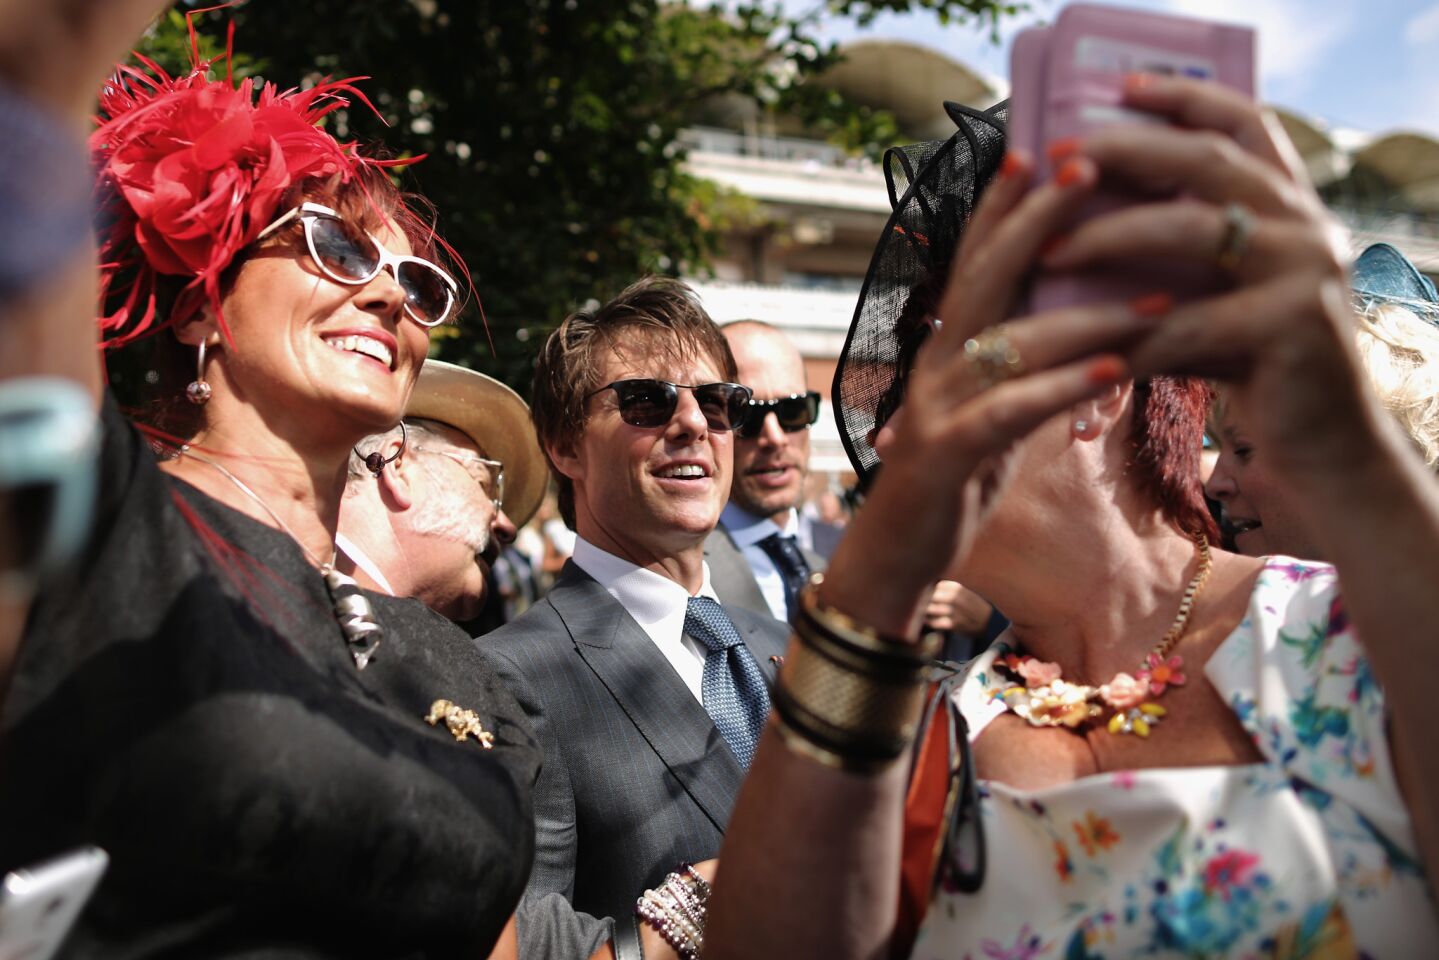 Women take selfies with actor Tom Cruise during Ladies Day at the prestigious Goodwood Races in Chichester, England, on July 31, 2014.